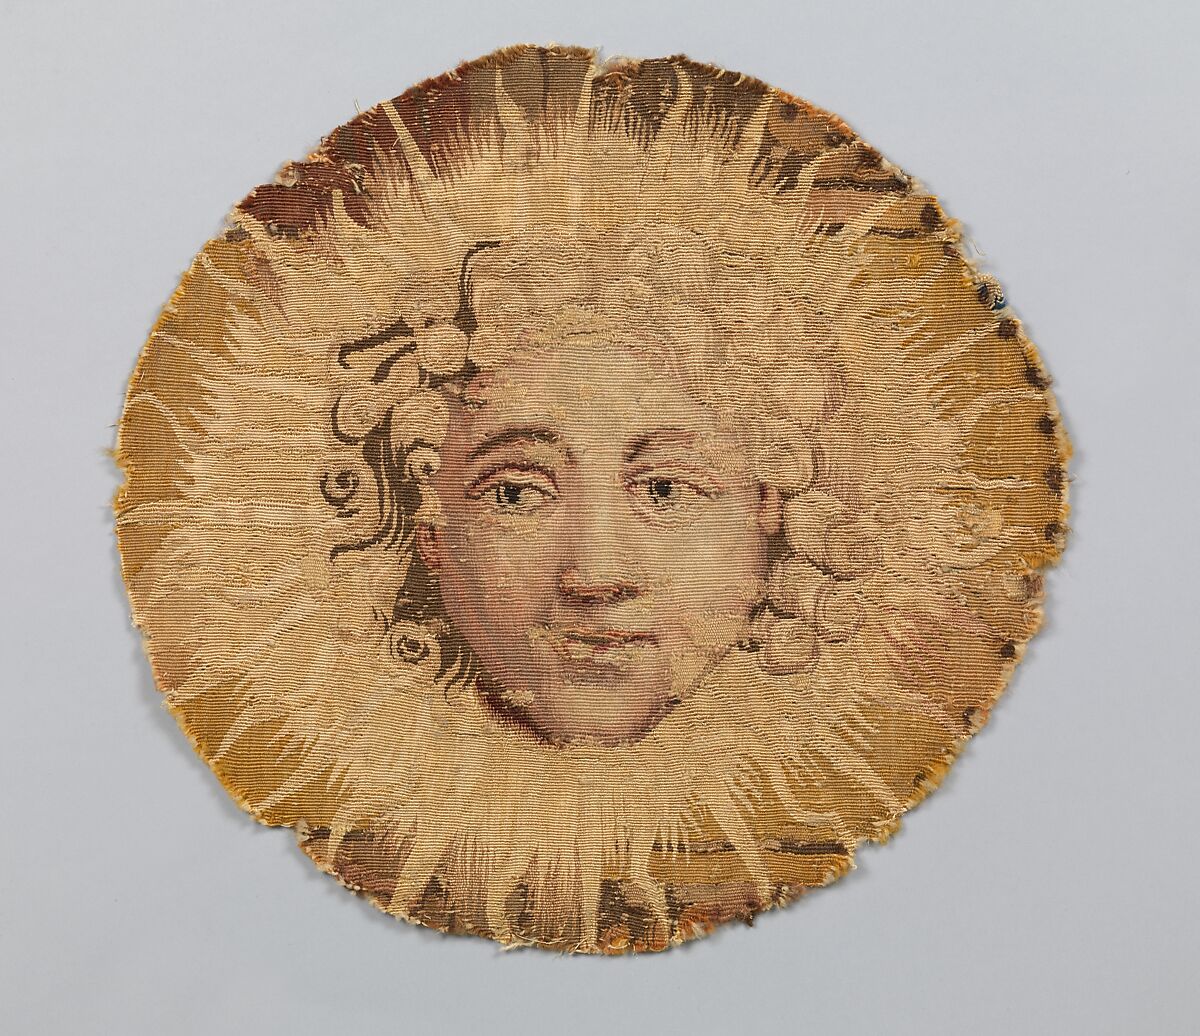 Head of Apollo, Probably manufactured at the Manufacture Nationale des Gobelins (French, established 1662), Warp: wool; Weft: wool and silk, French, Paris 